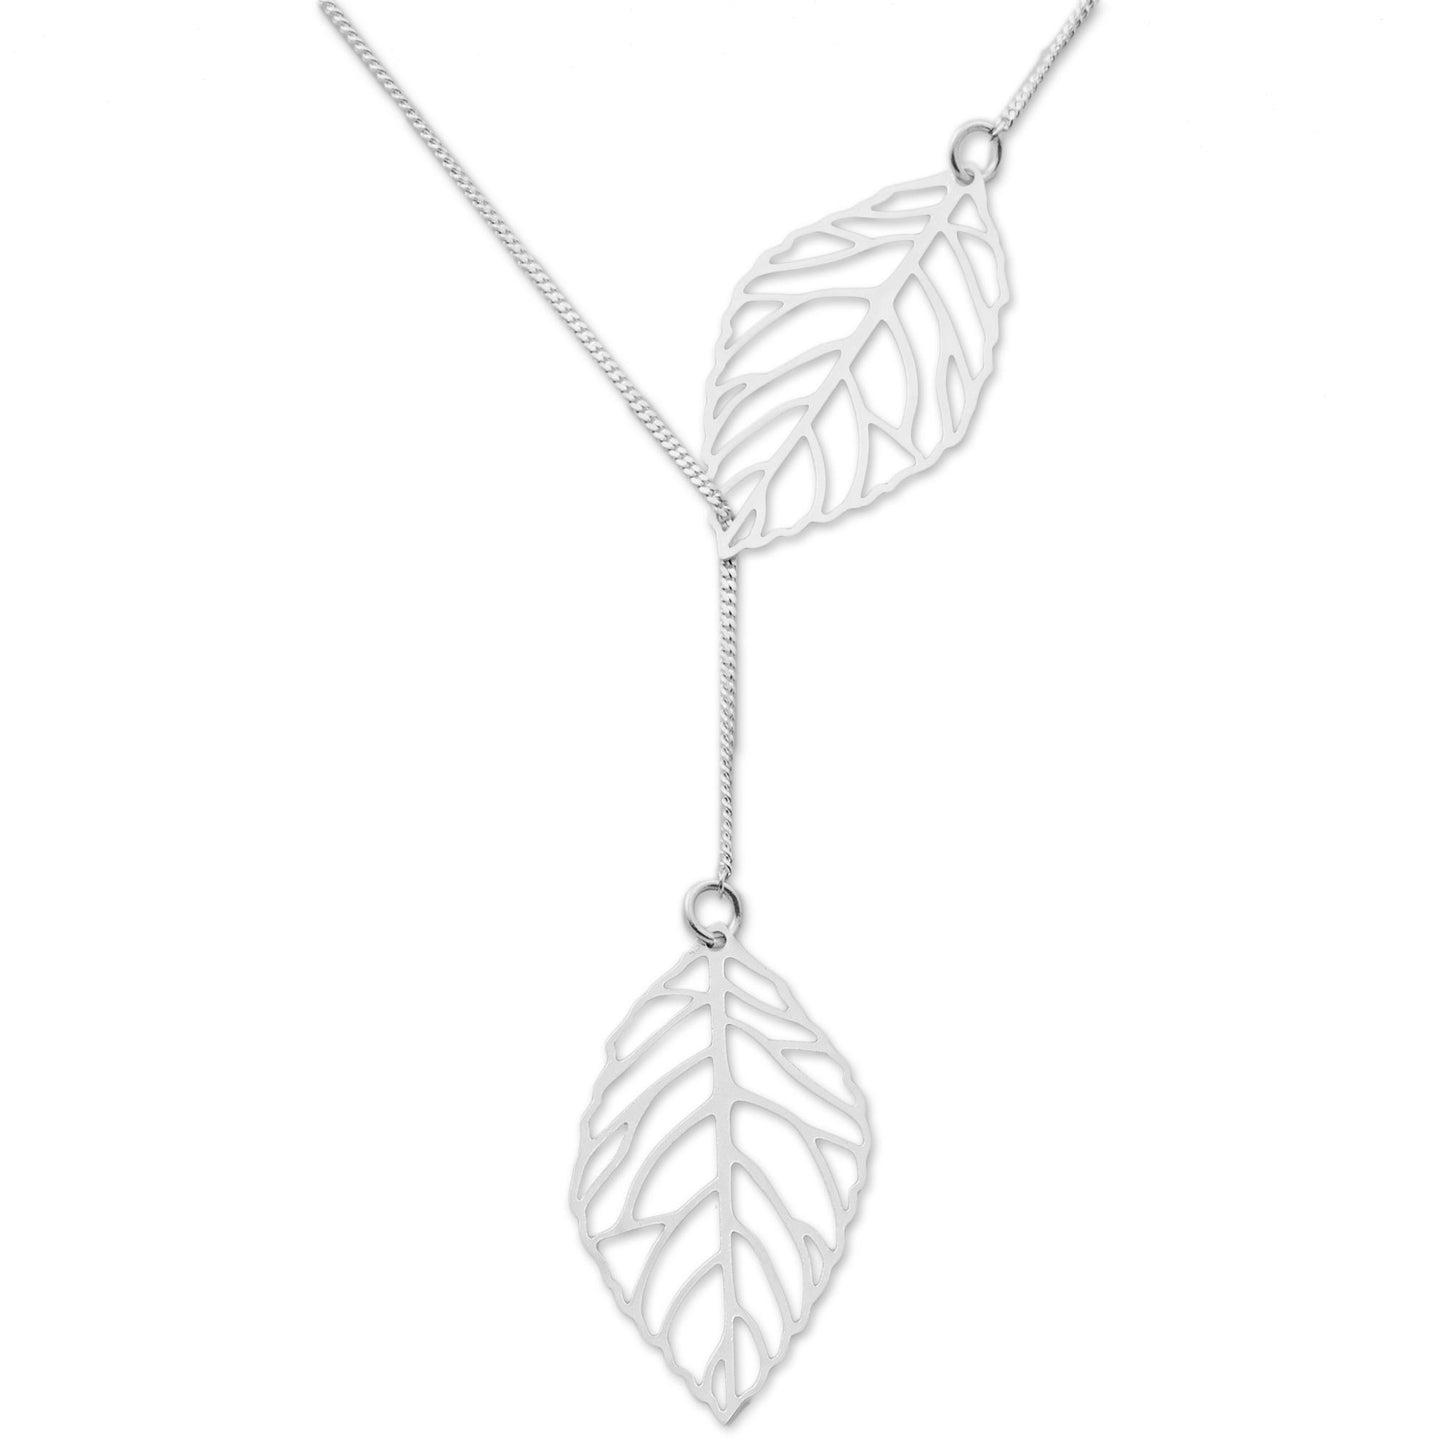 Shining Leaves Sterling Silver Pendant Necklace Leaves from Peru